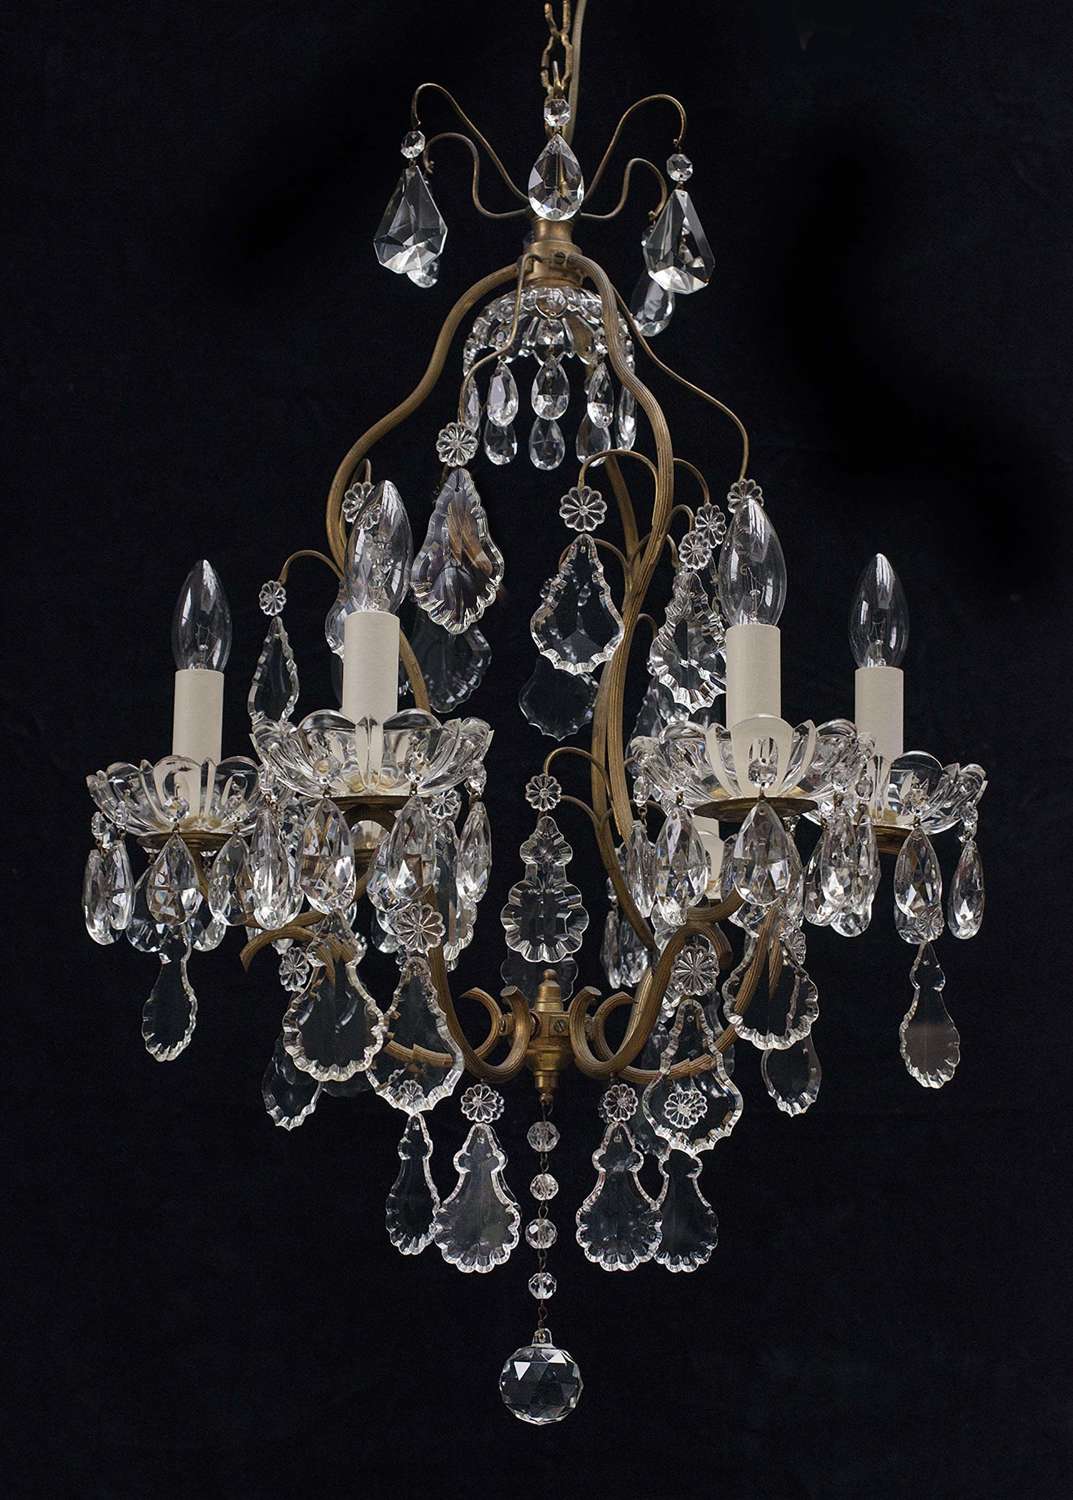 6 light antique French birdcage chandelier with crystal leaves